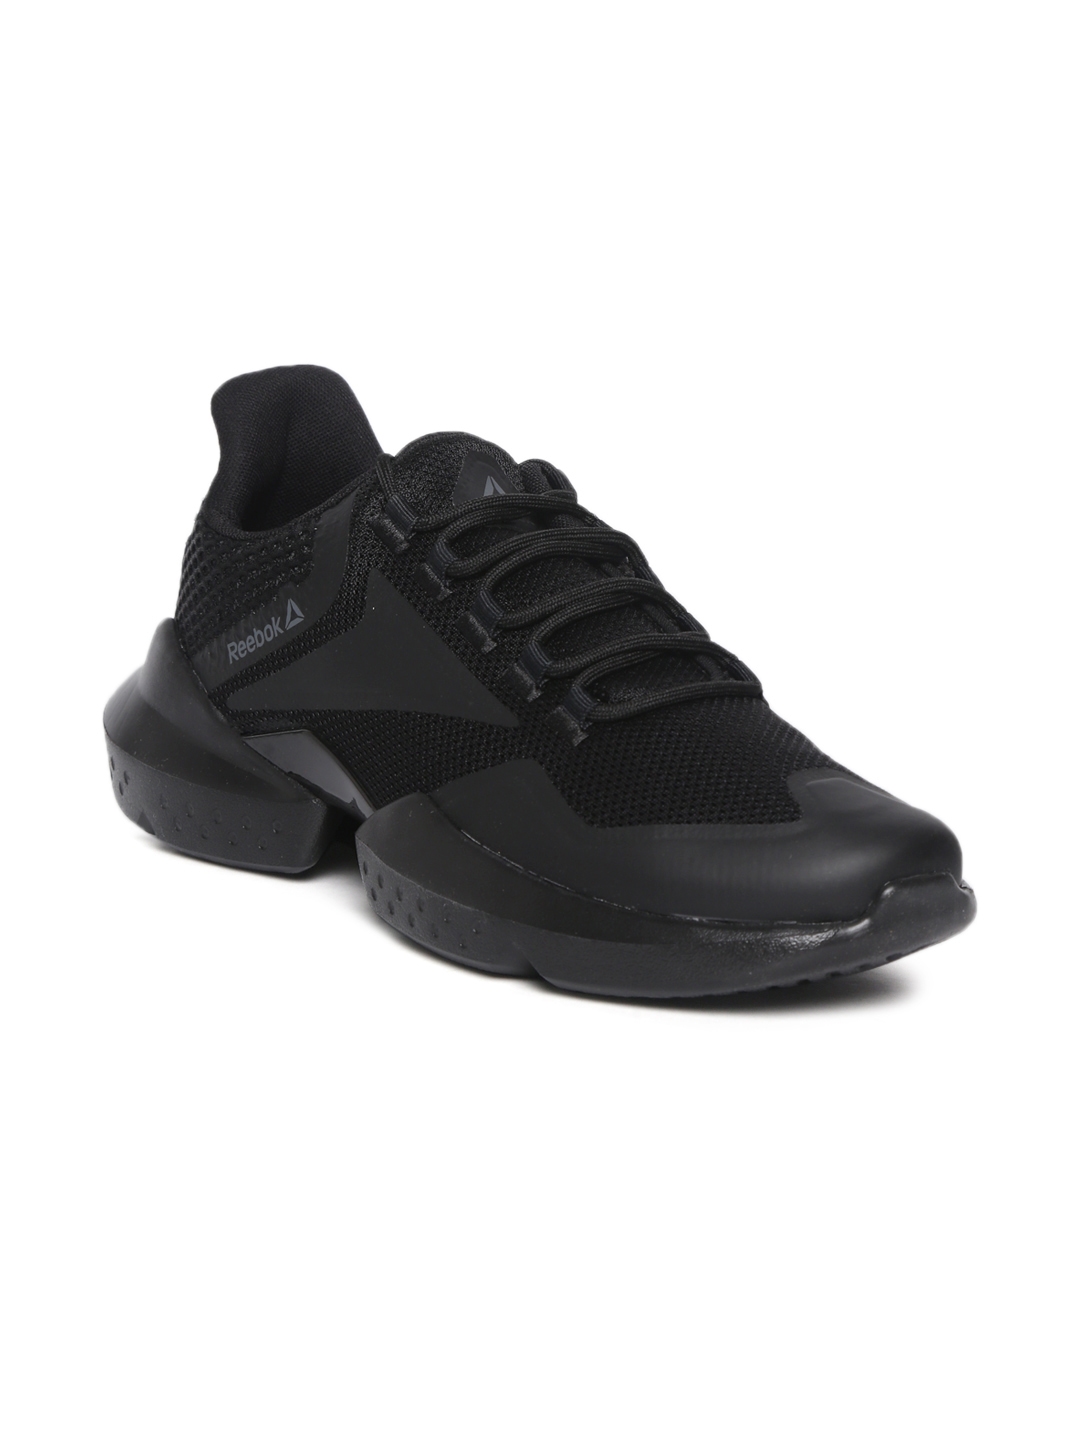 reebok 3d ultralite shoes price in india